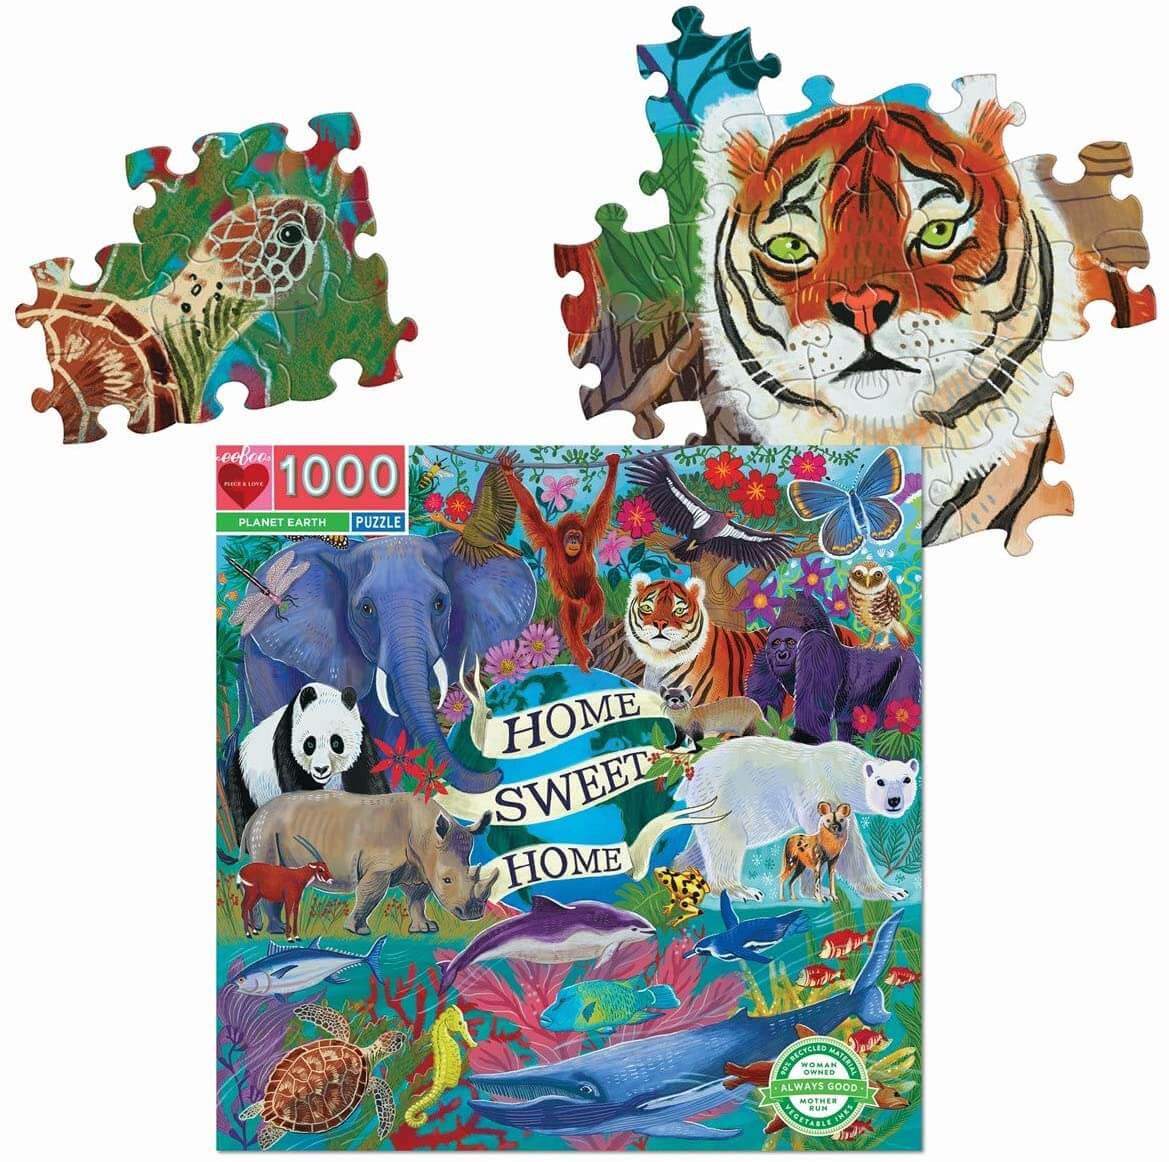 eeBoo - Piece and Love Planet Earth 1000 Piece Square Adult Jigsaw Puzzle